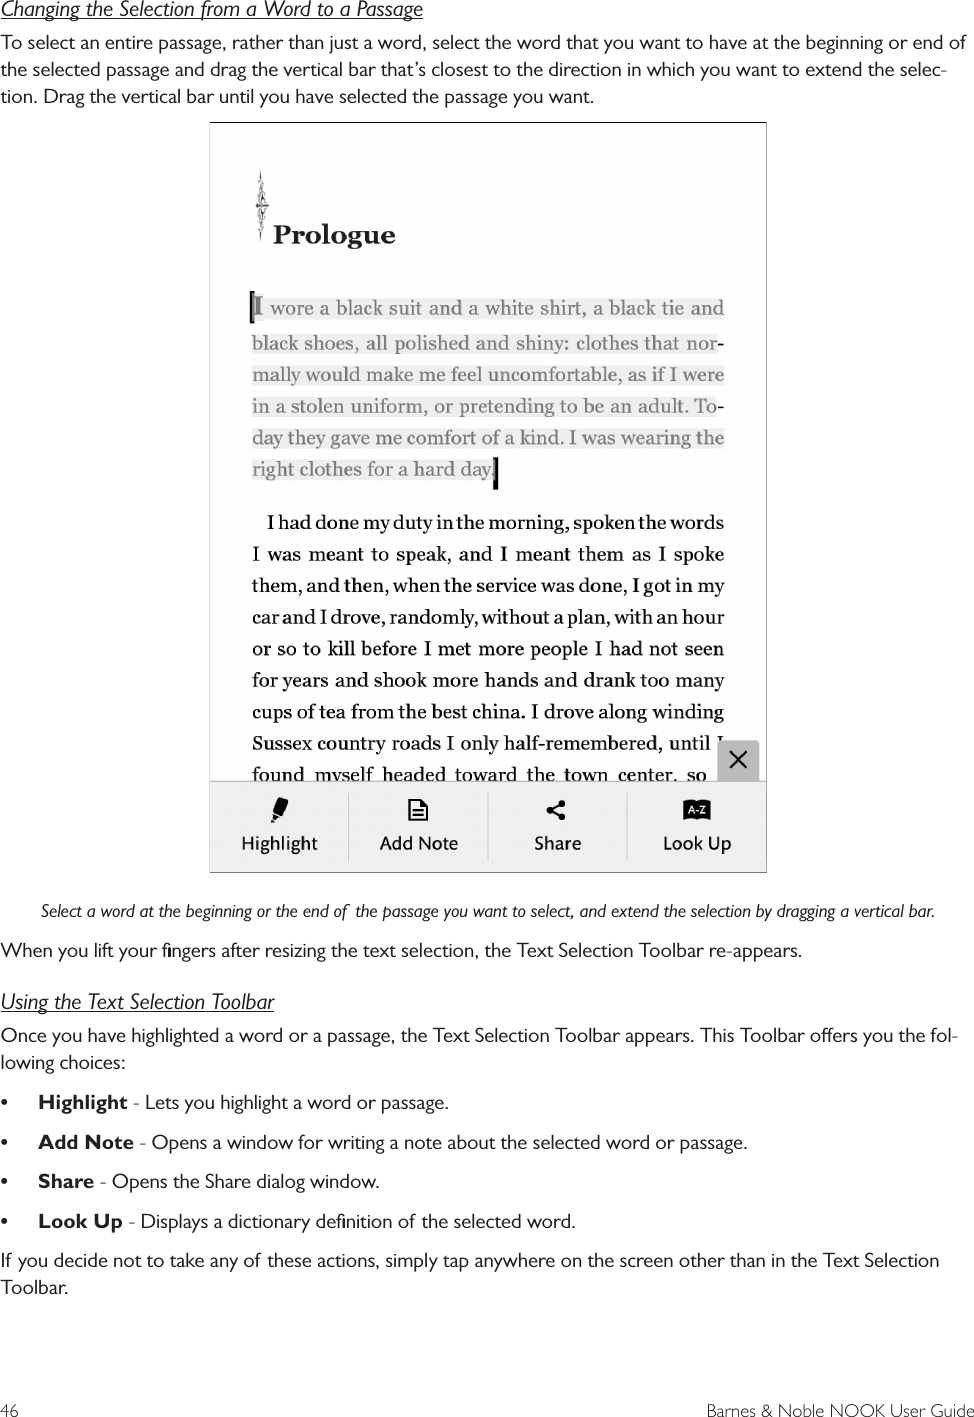 46  Barnes &amp; Noble NOOK User GuideChanging the Selection from a Word to a PassageTo select an entire passage, rather than just a word, select the word that you want to have at the beginning or end of the selected passage and drag the vertical bar that’s closest to the direction in which you want to extend the selec-tion. Drag the vertical bar until you have selected the passage you want.Select a word at the beginning or the end of  the passage you want to select, and extend the selection by dragging a vertical bar.When you lift your ﬁngers after resizing the text selection, the Text Selection Toolbar re-appears.Using the Text Selection ToolbarOnce you have highlighted a word or a passage, the Text Selection Toolbar appears. This Toolbar oers you the fol-lowing choices: • Highlight - Lets you highlight a word or passage.• Add Note - Opens a window for writing a note about the selected word or passage.• Share - Opens the Share dialog window.• Look Up - Displays a dictionary deﬁnition of the selected word.If you decide not to take any of these actions, simply tap anywhere on the screen other than in the Text Selection Toolbar.